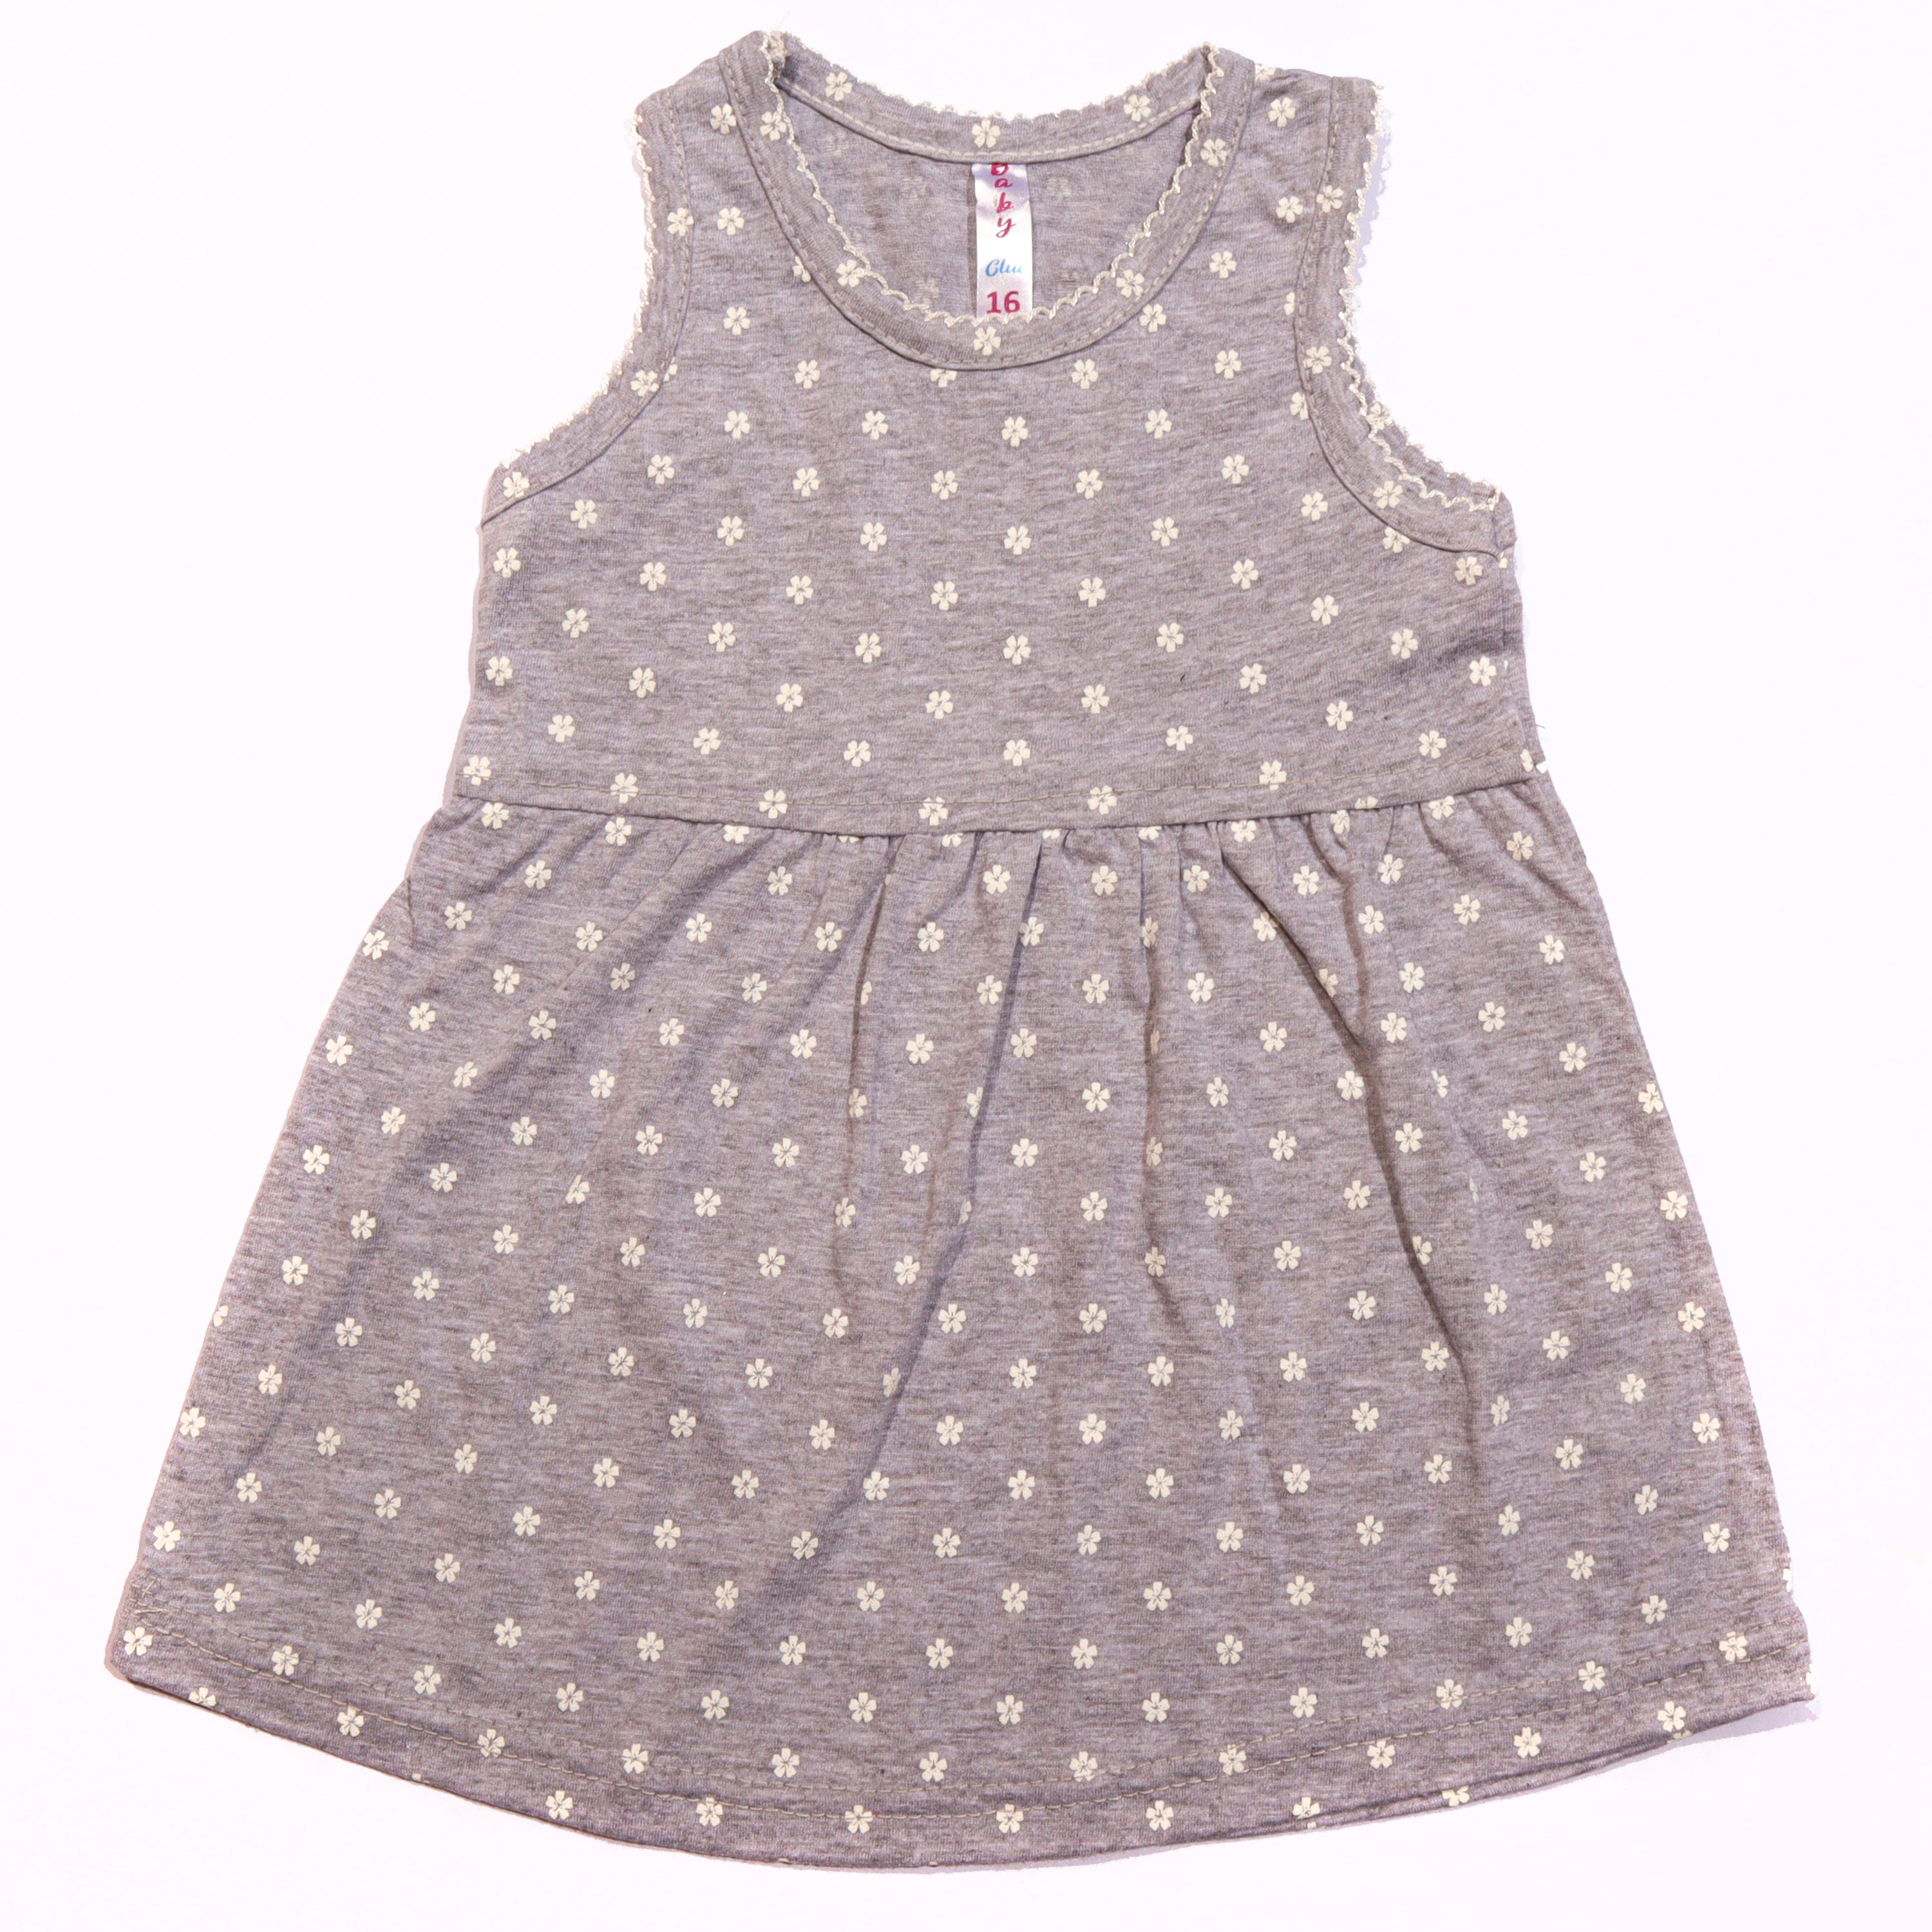 Girls Frock colour grey